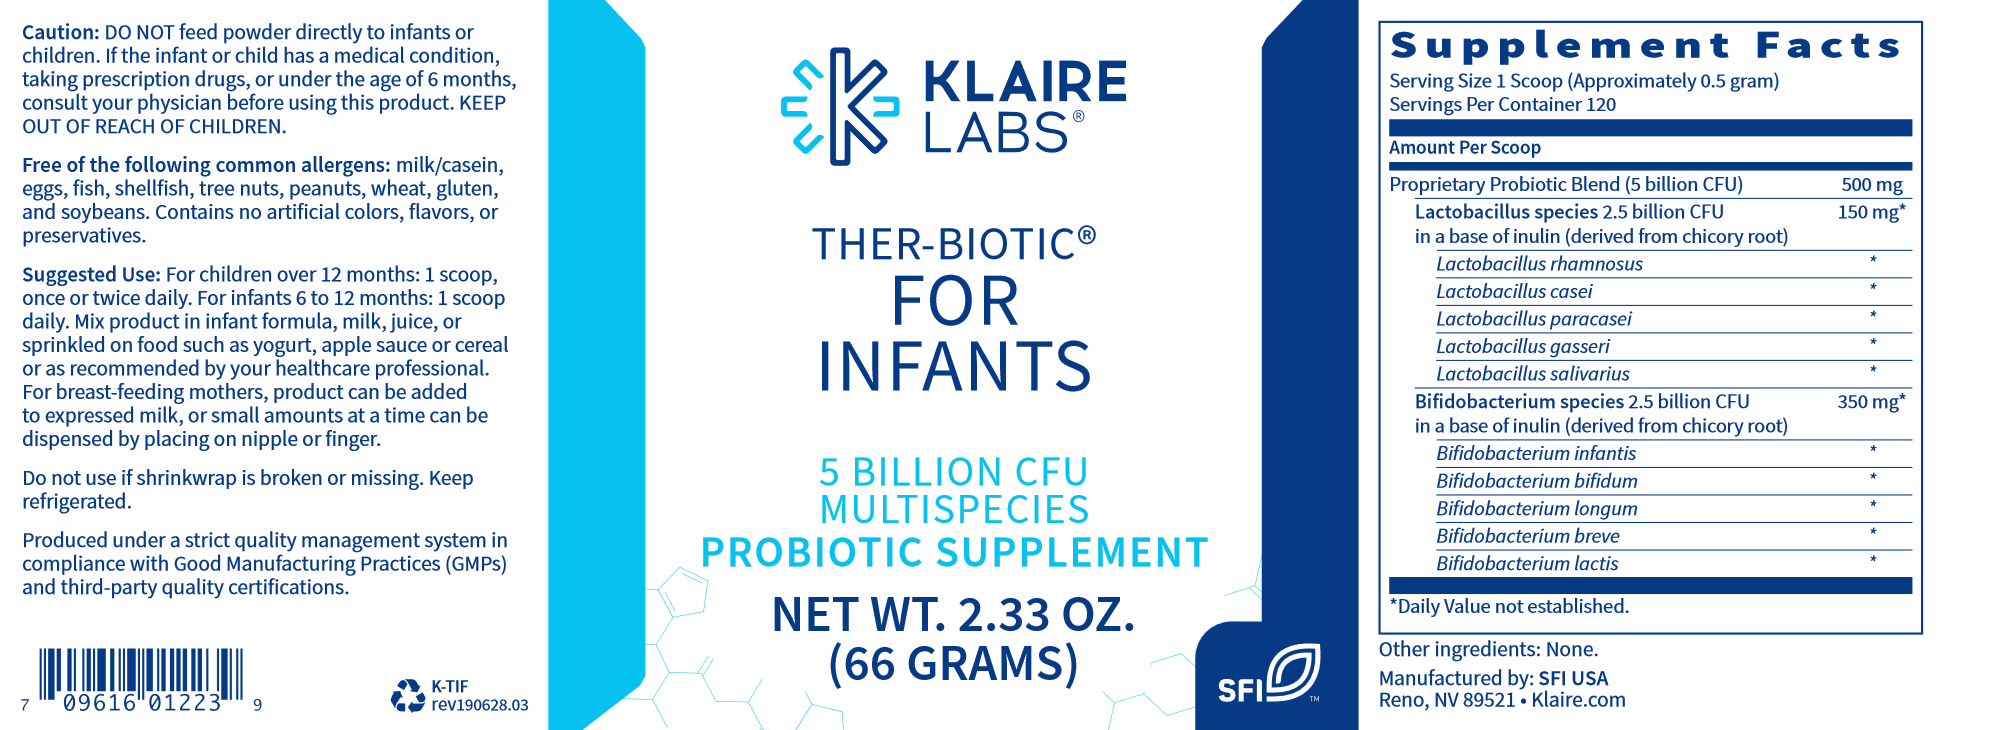 Ther-Biotic® for Infants